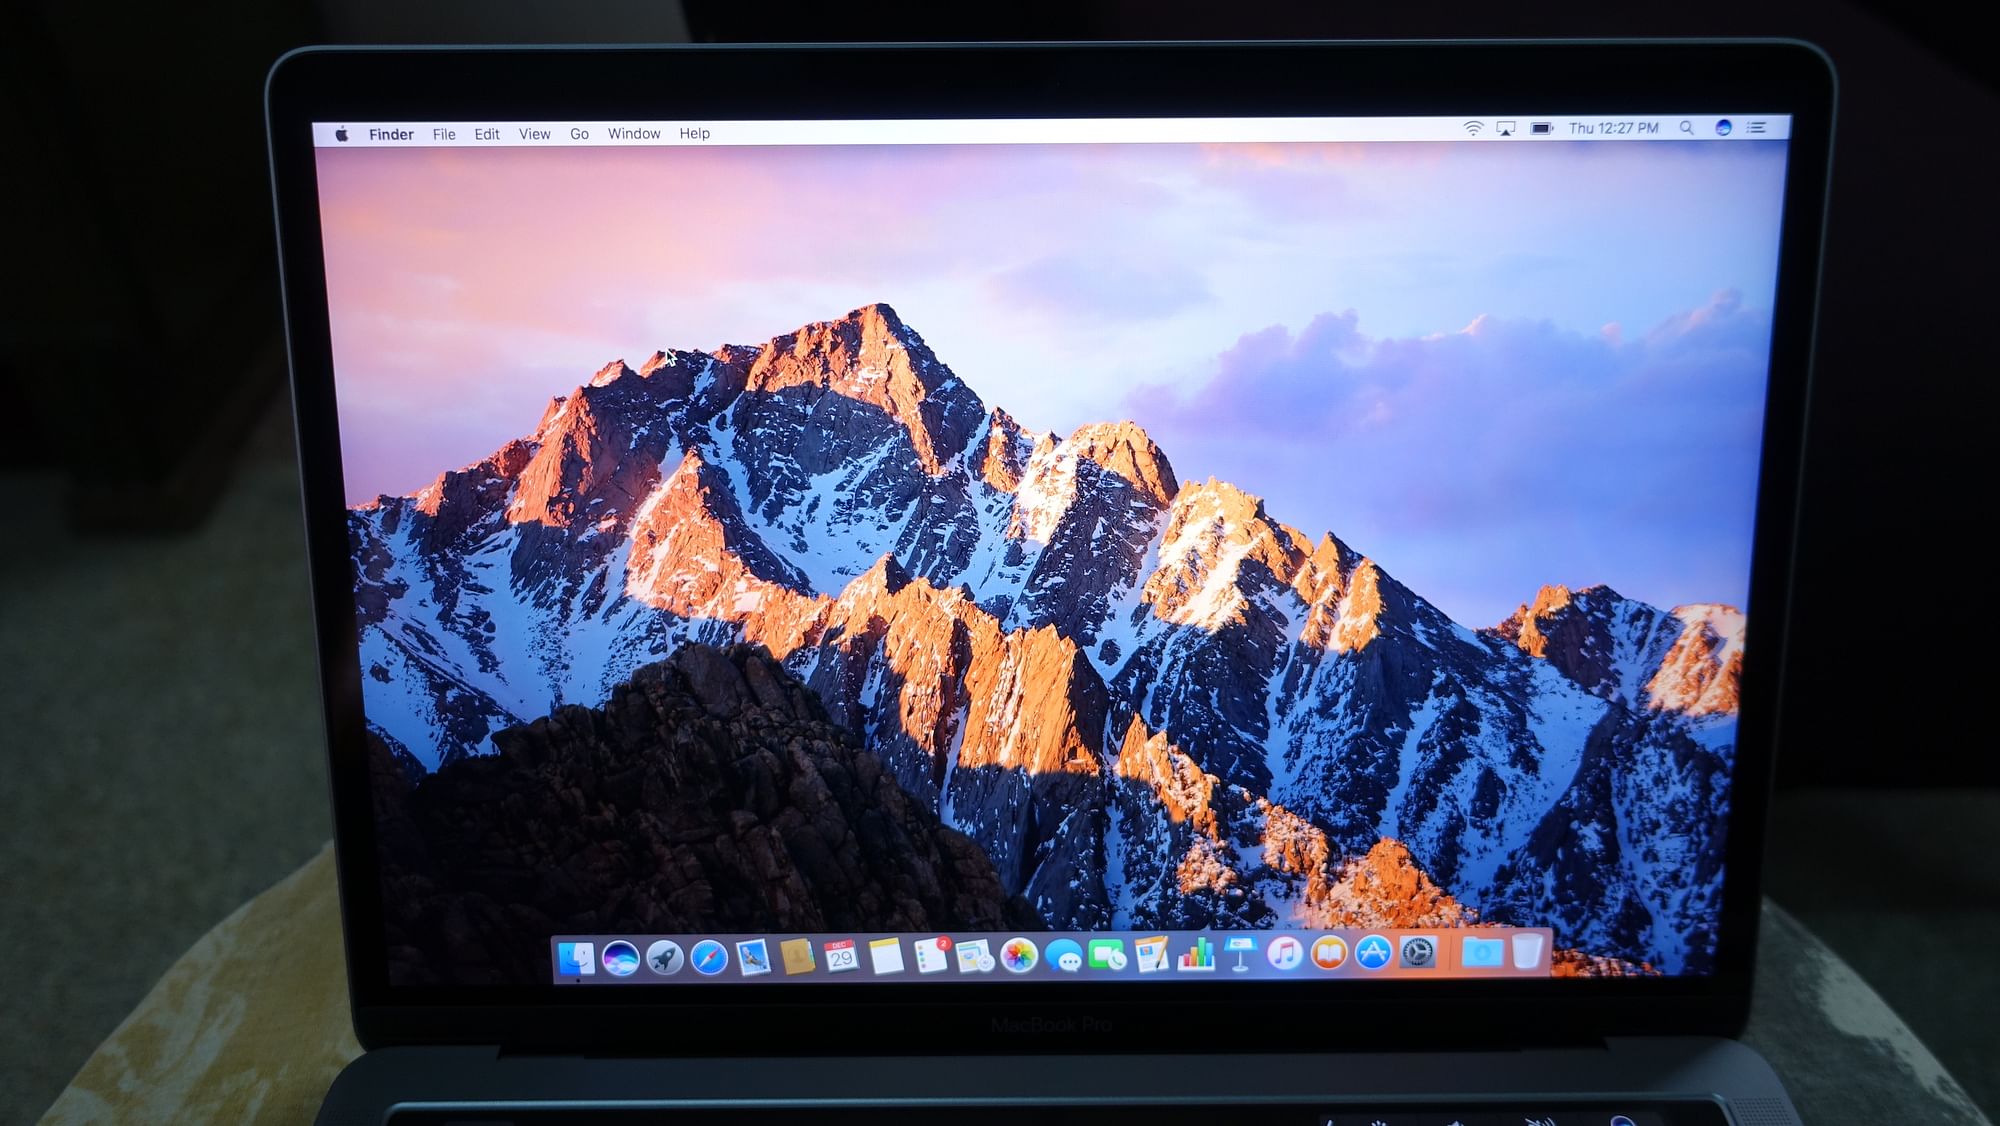 Top-notch, high resolution display on the MacBook Pro. (Photo: <b>The Quint</b>/@2shar)